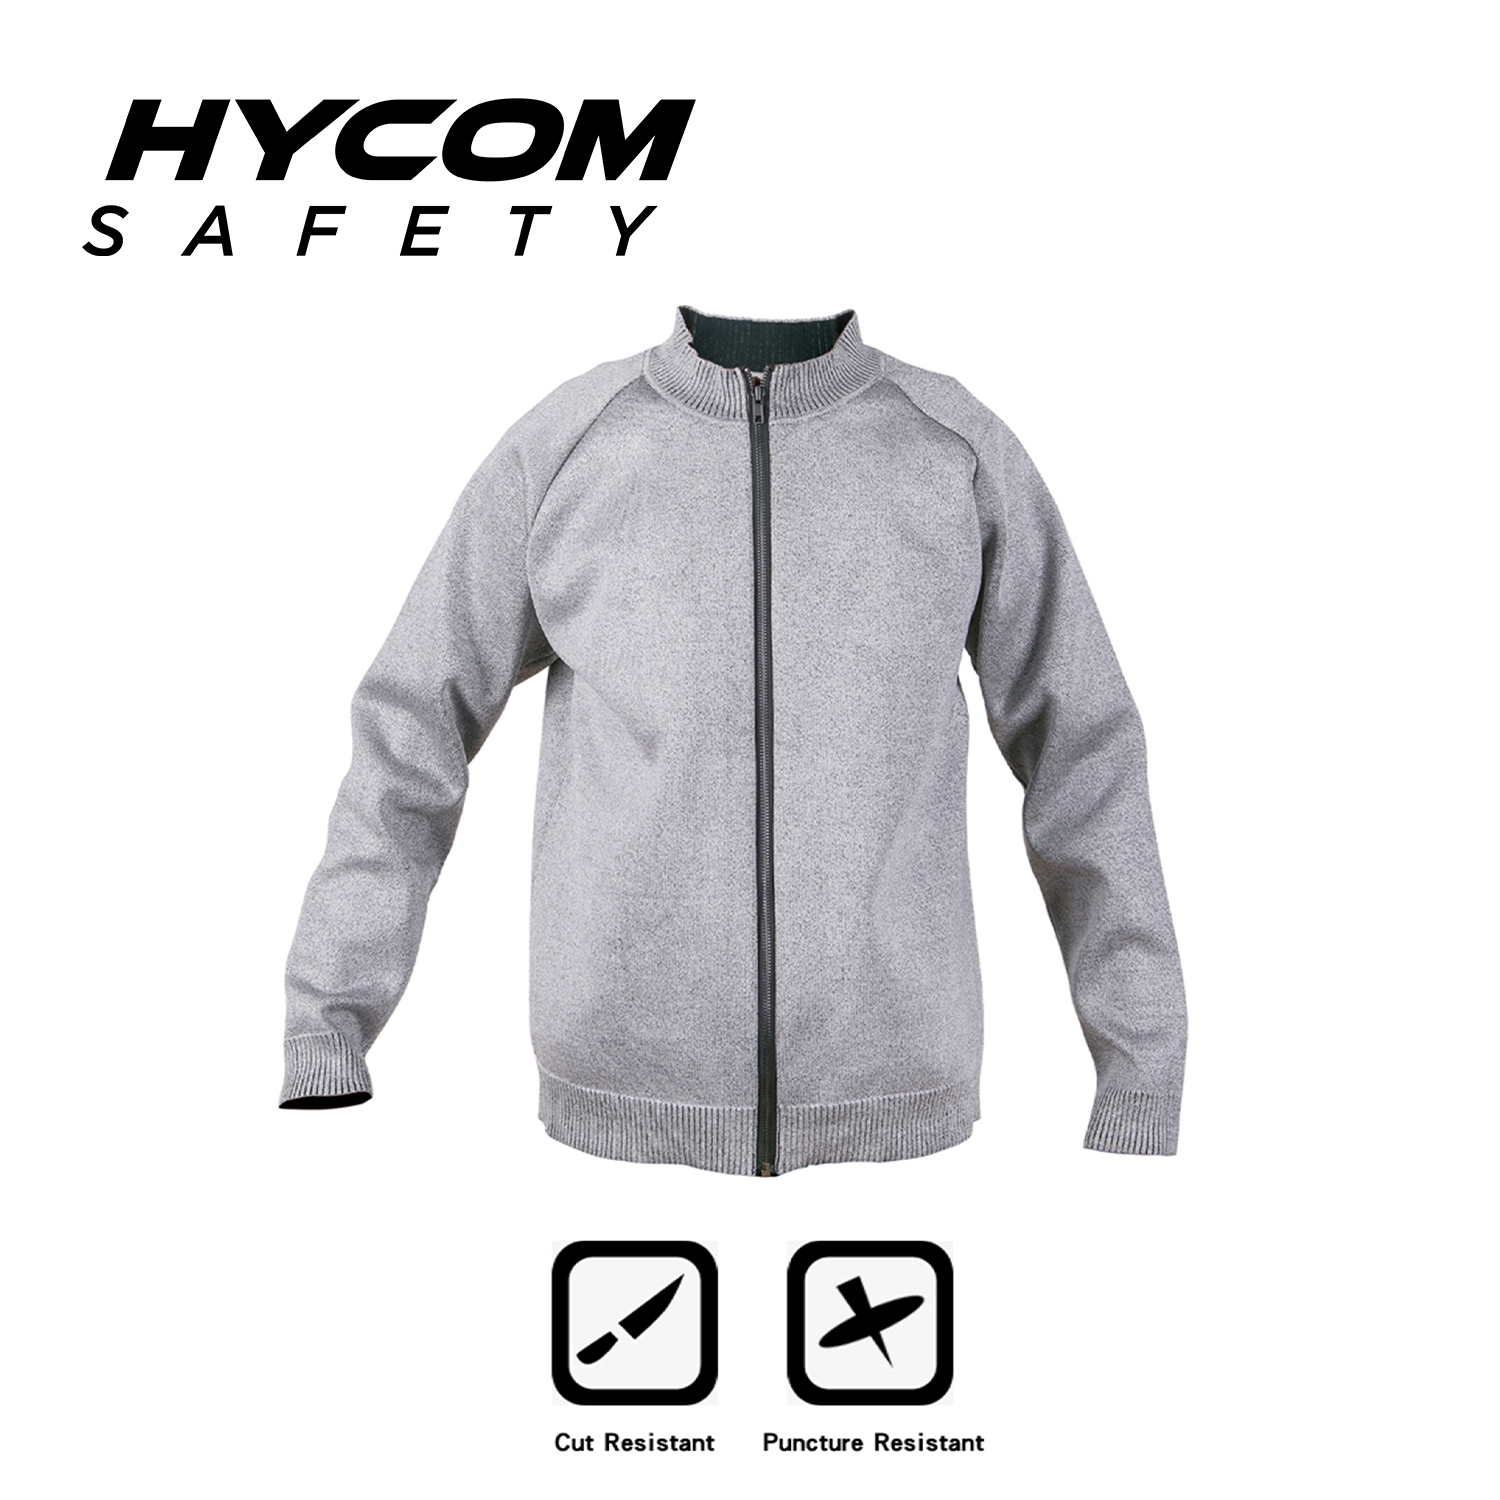 HYCOM ANSI 5 Cut Resistant Zipper Jacket with Breathable Pique And Thumb Hole PPE Clothing